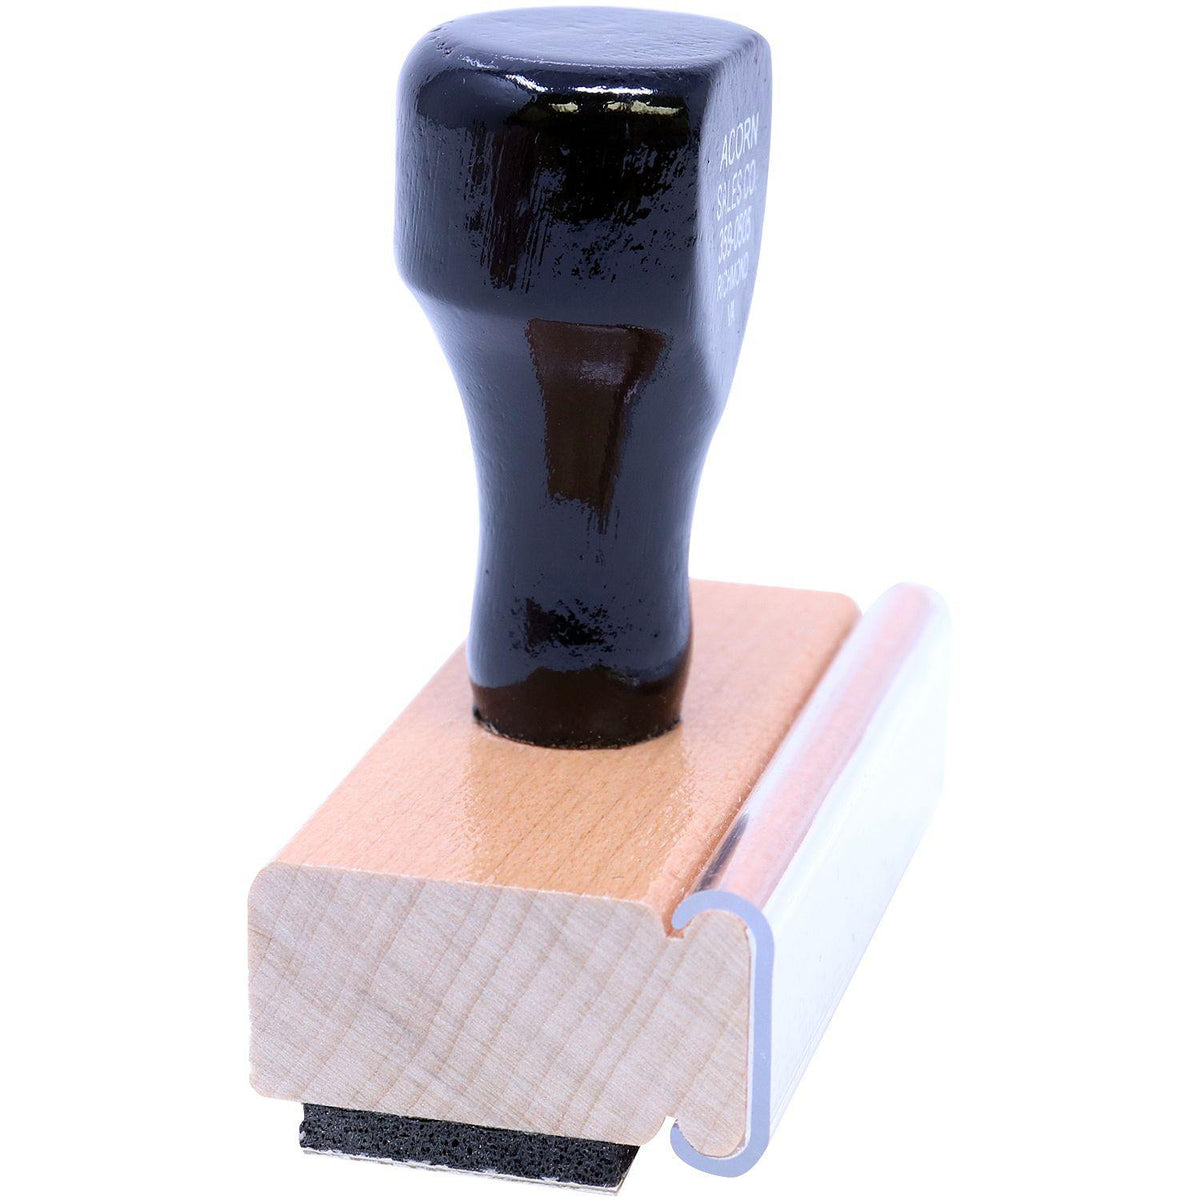 Side View of Large Living Will On File Rubber Stamp at an Angle